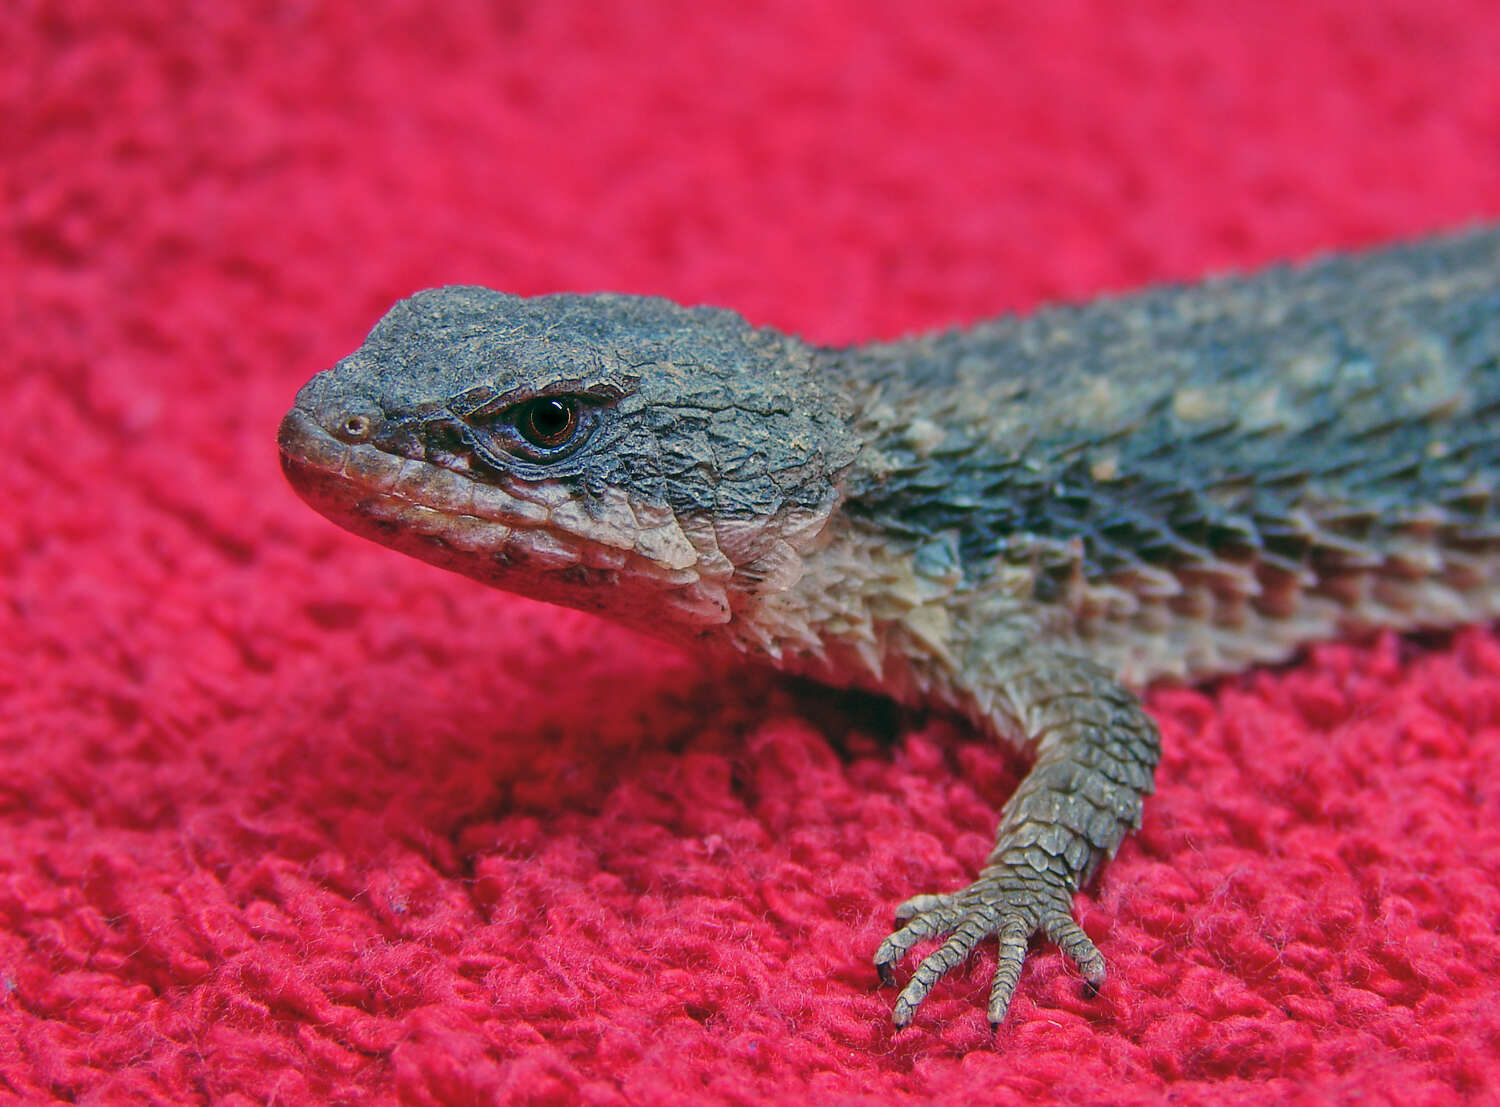 Image of East African spiny-tailed lizard